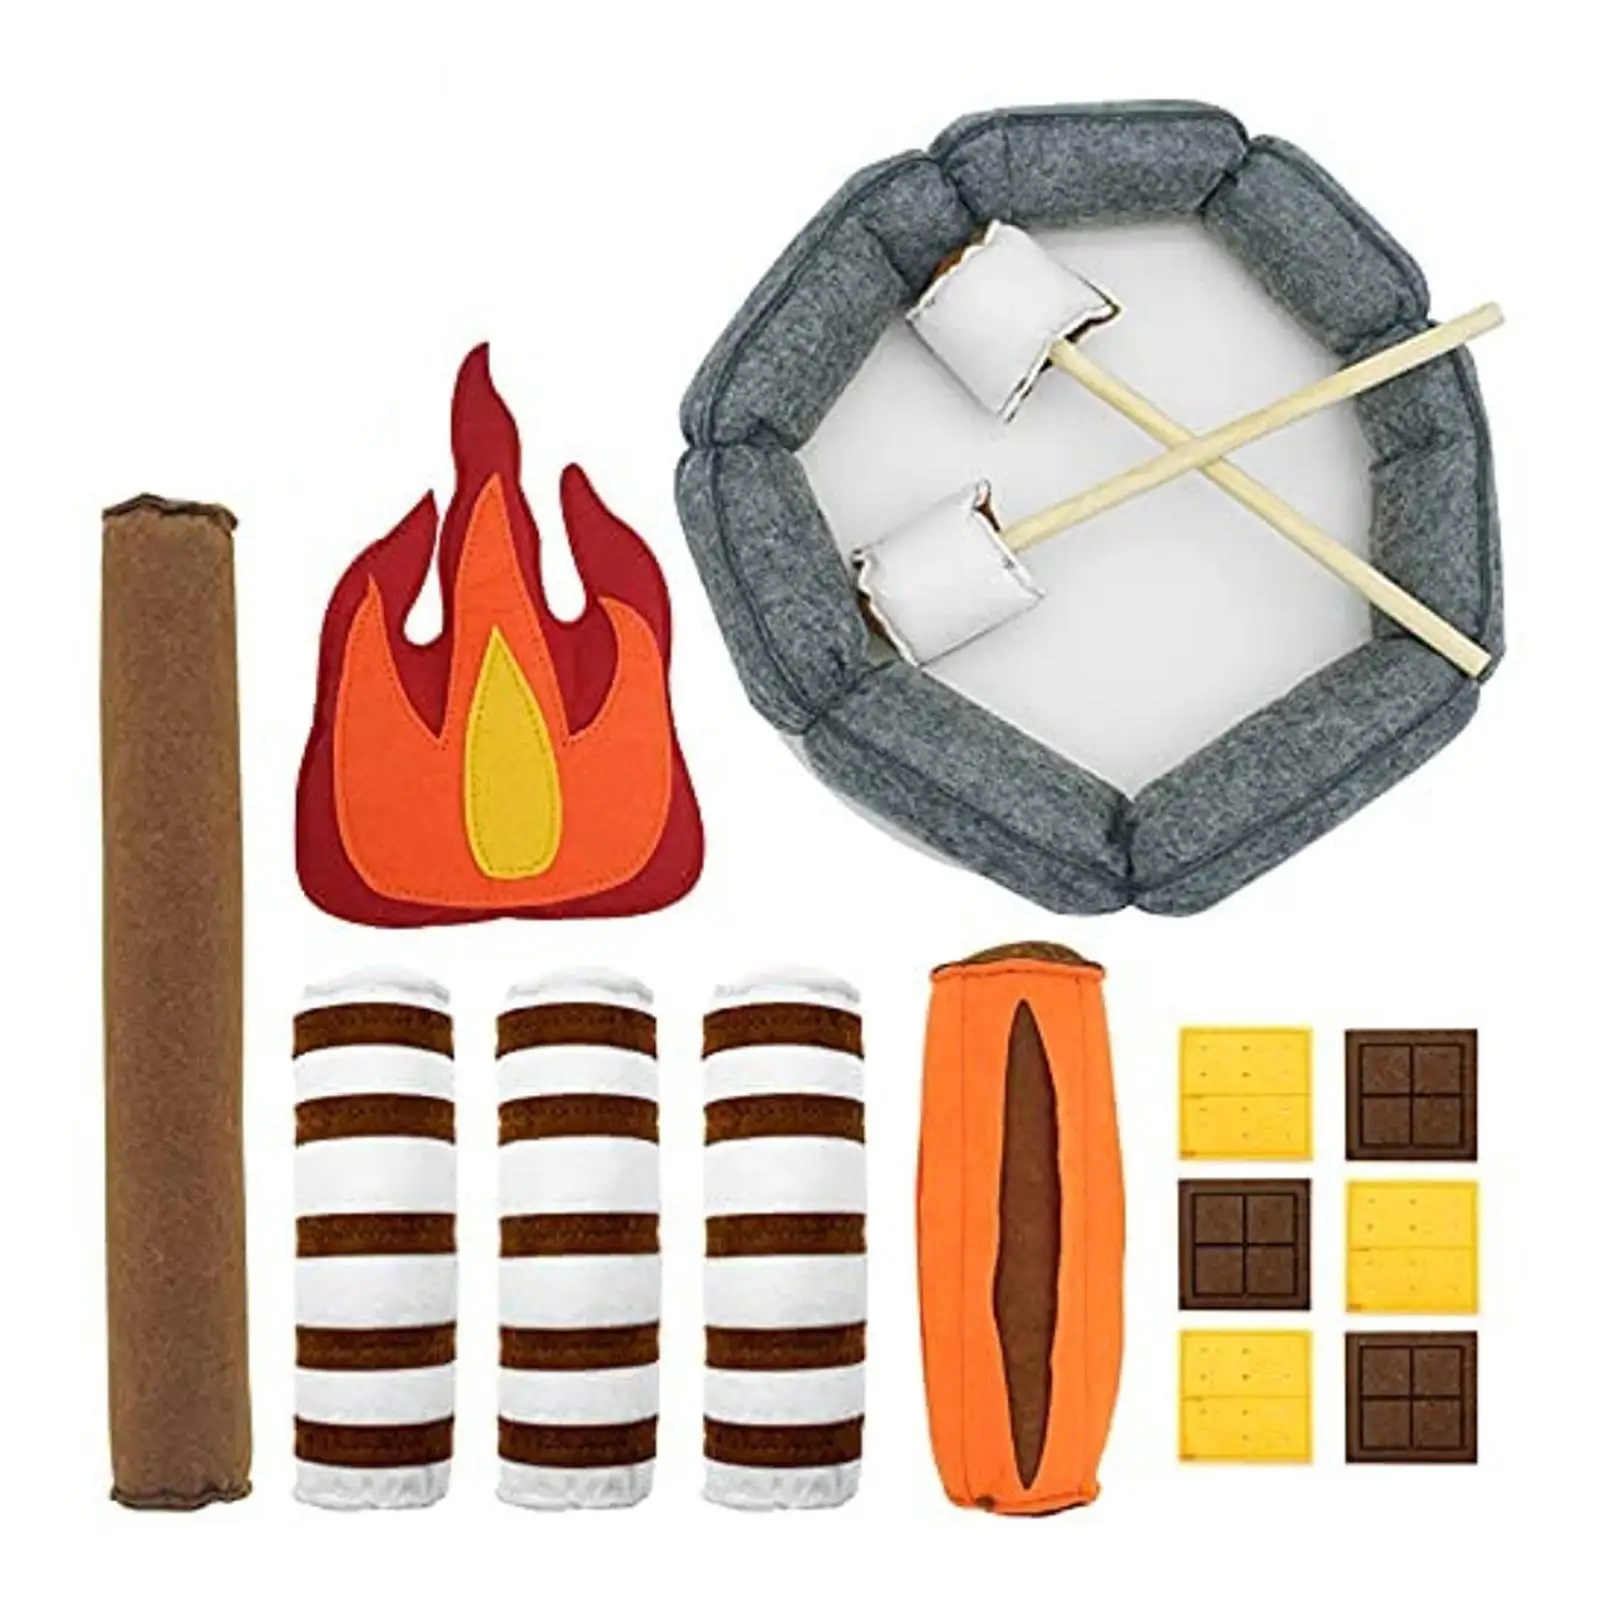 Pretend Play Campfire Funny Needfire Branch Outdoor Camping Toys Housewarming Gifts Bedroom Stuffed Doll Camping Toy Playing Set